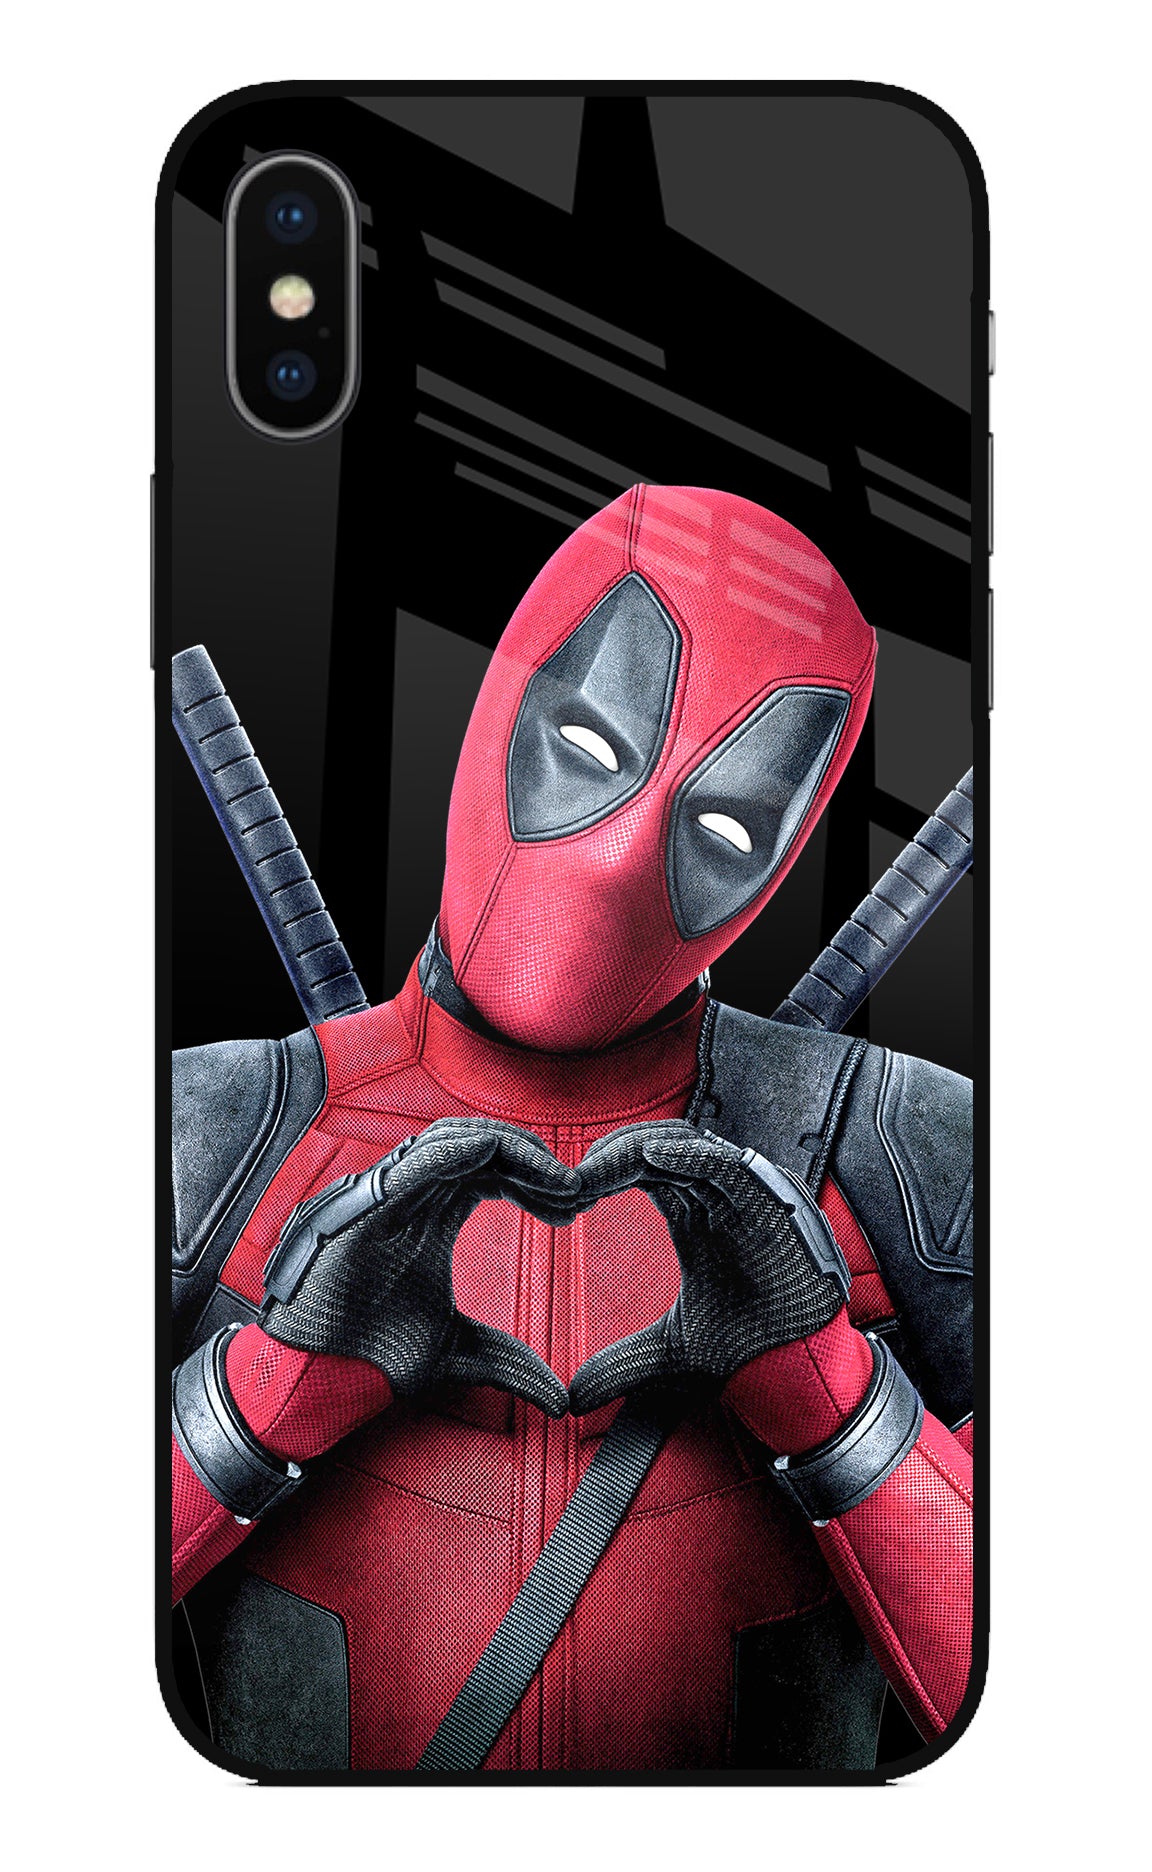 Deadpool iPhone X Back Cover